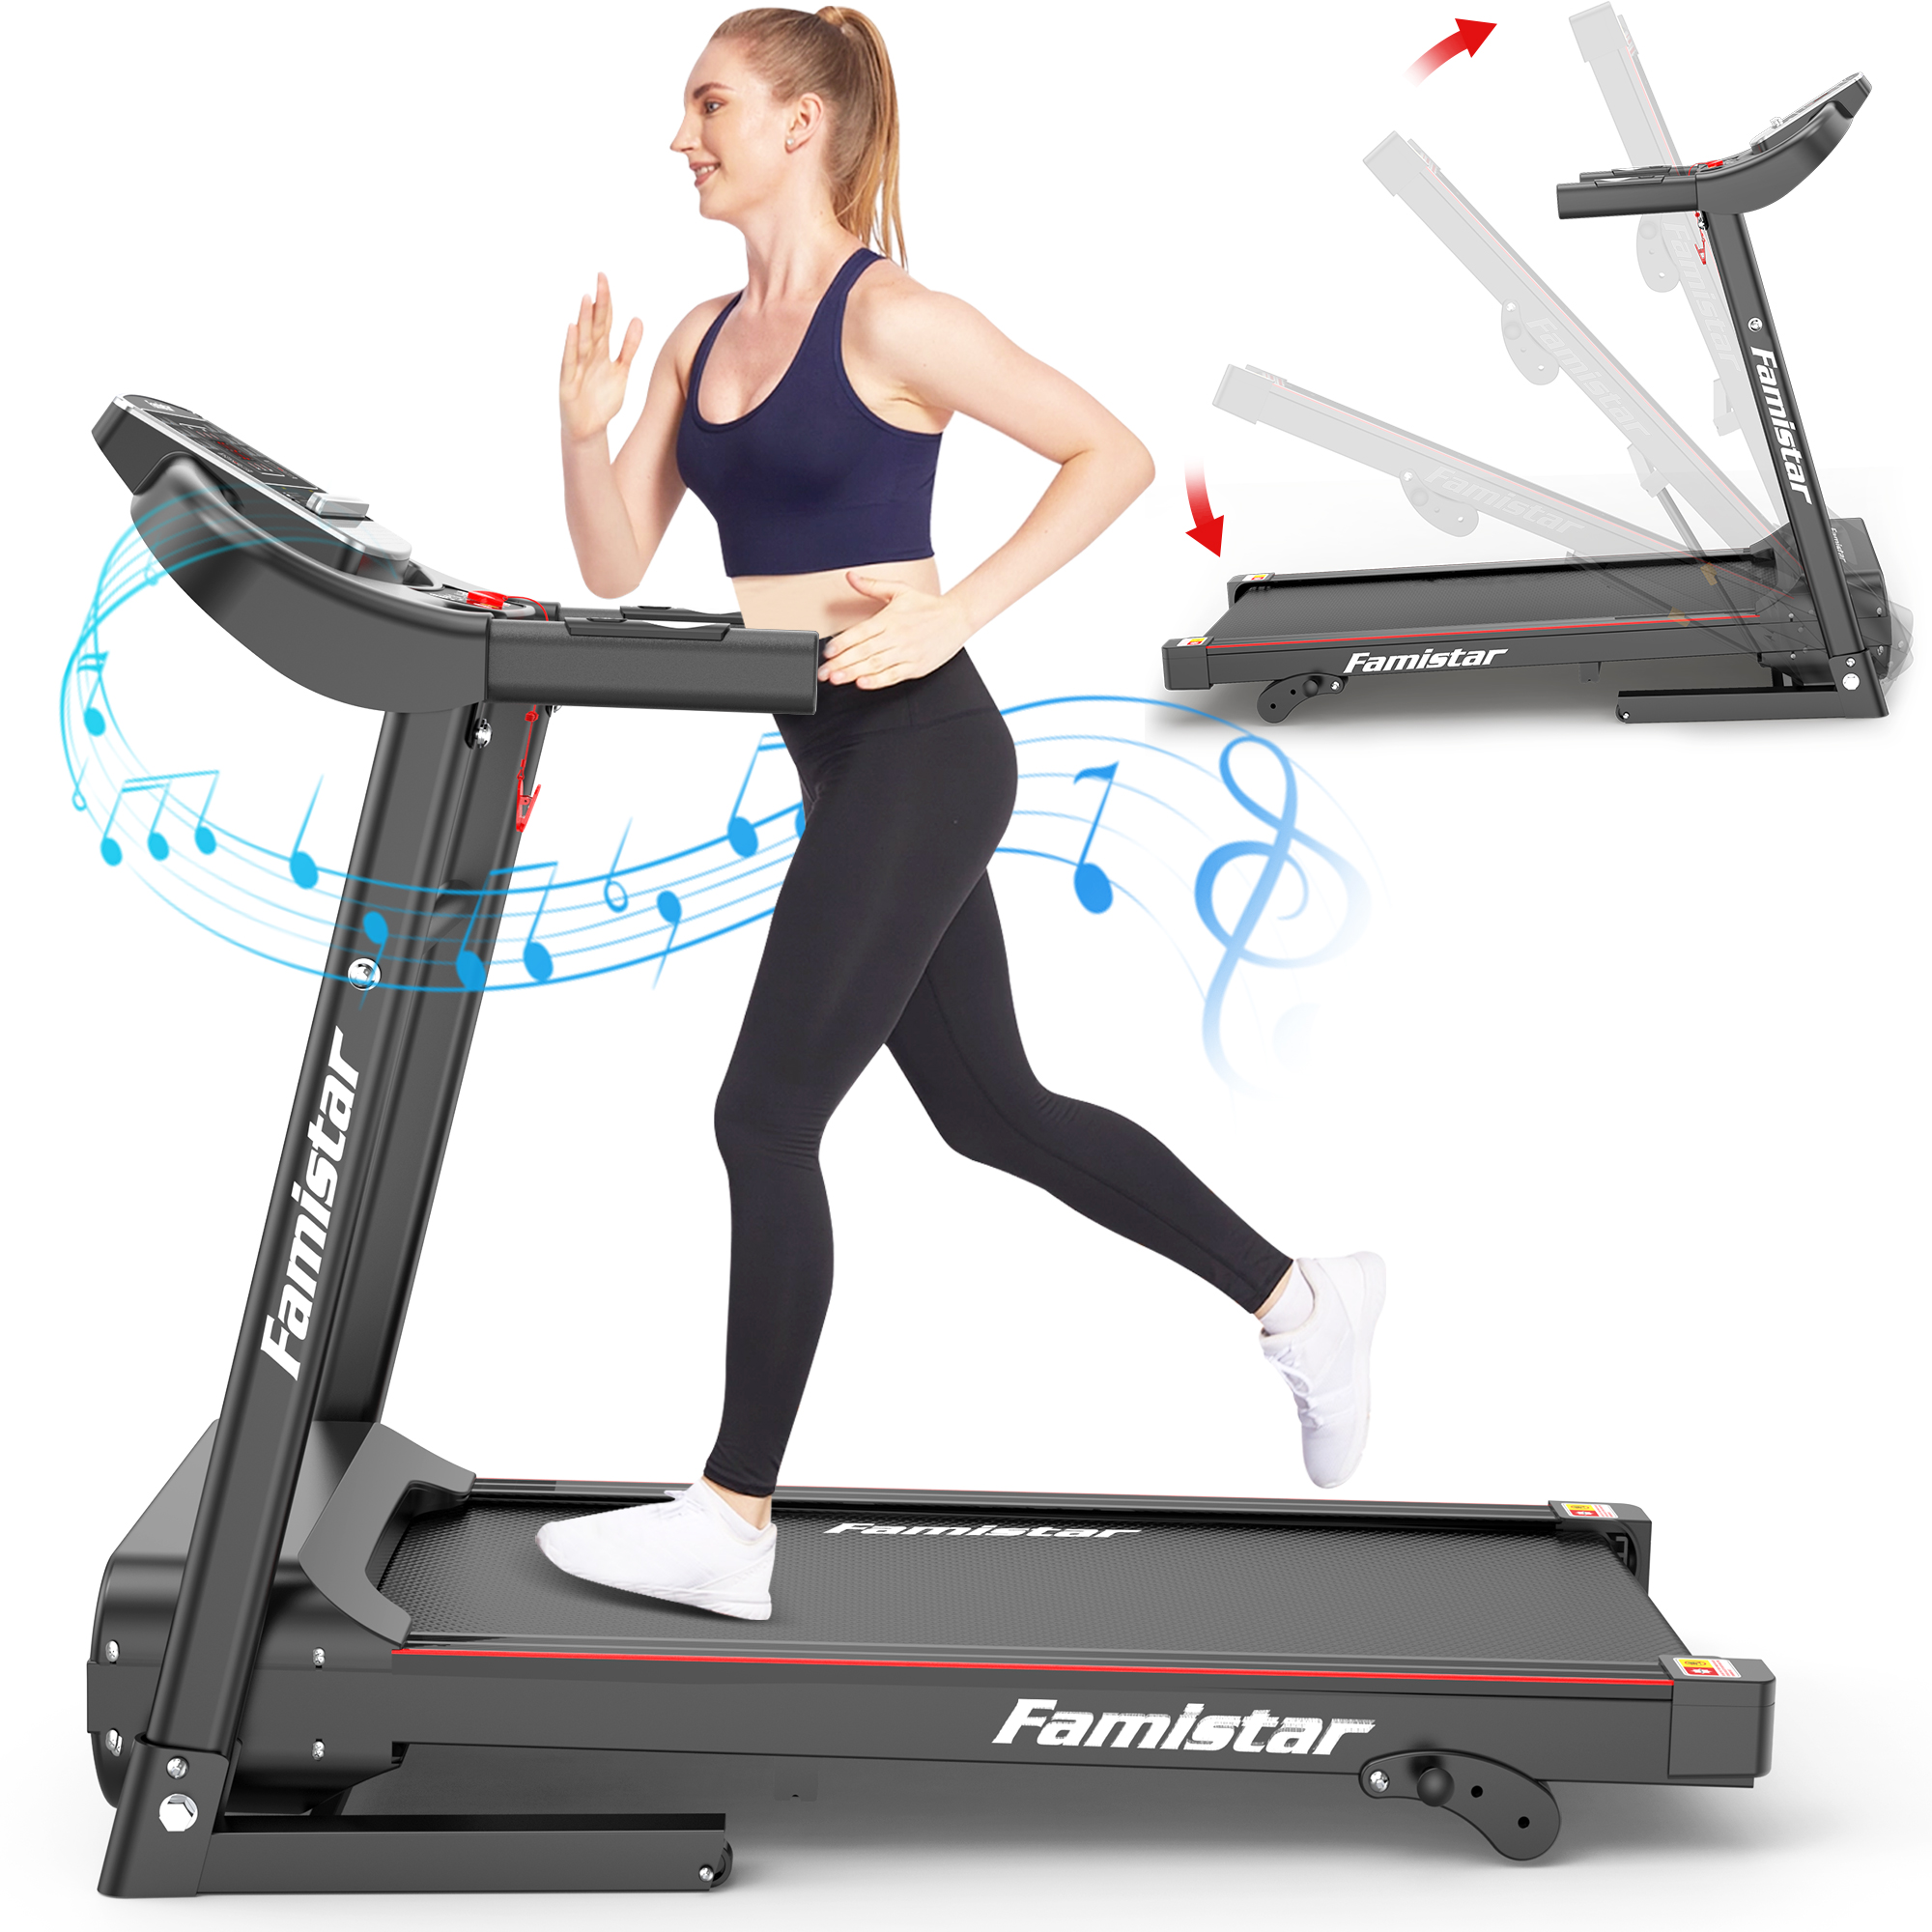 Famistar JK1607 Folding Electric Treadmill for Home Jogging Running with 2.5HP 3 Manual Incline | MP3 Player | Safety Key | LCD Display | Cup Holder - Portable Space Saving - Free Gift 2 Knee Straps - image 1 of 11